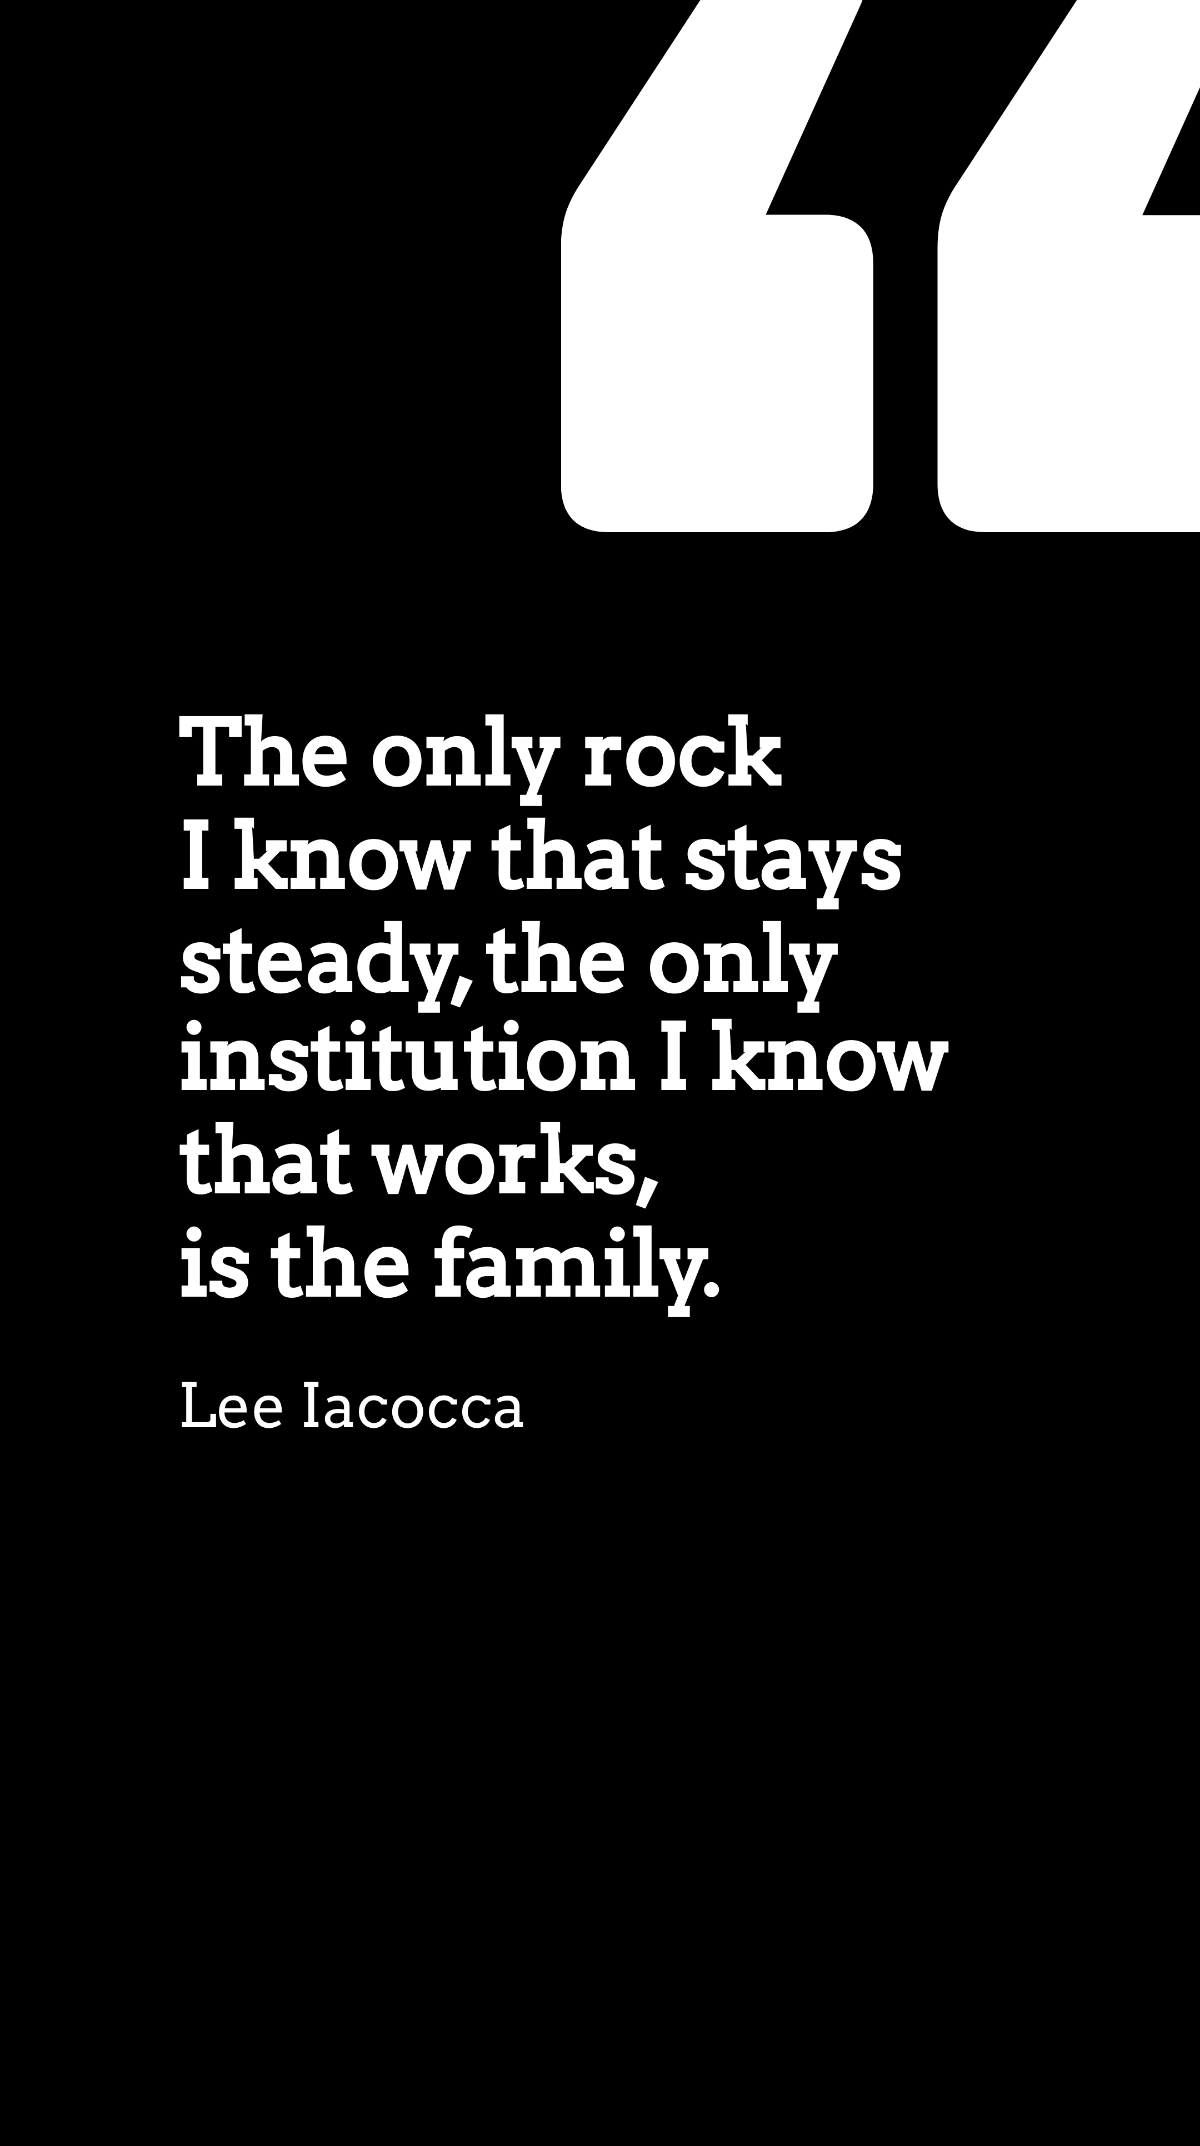 Lee Iacocca - The only rock I know that stays steady, the only institution I know that works, is the family. Template